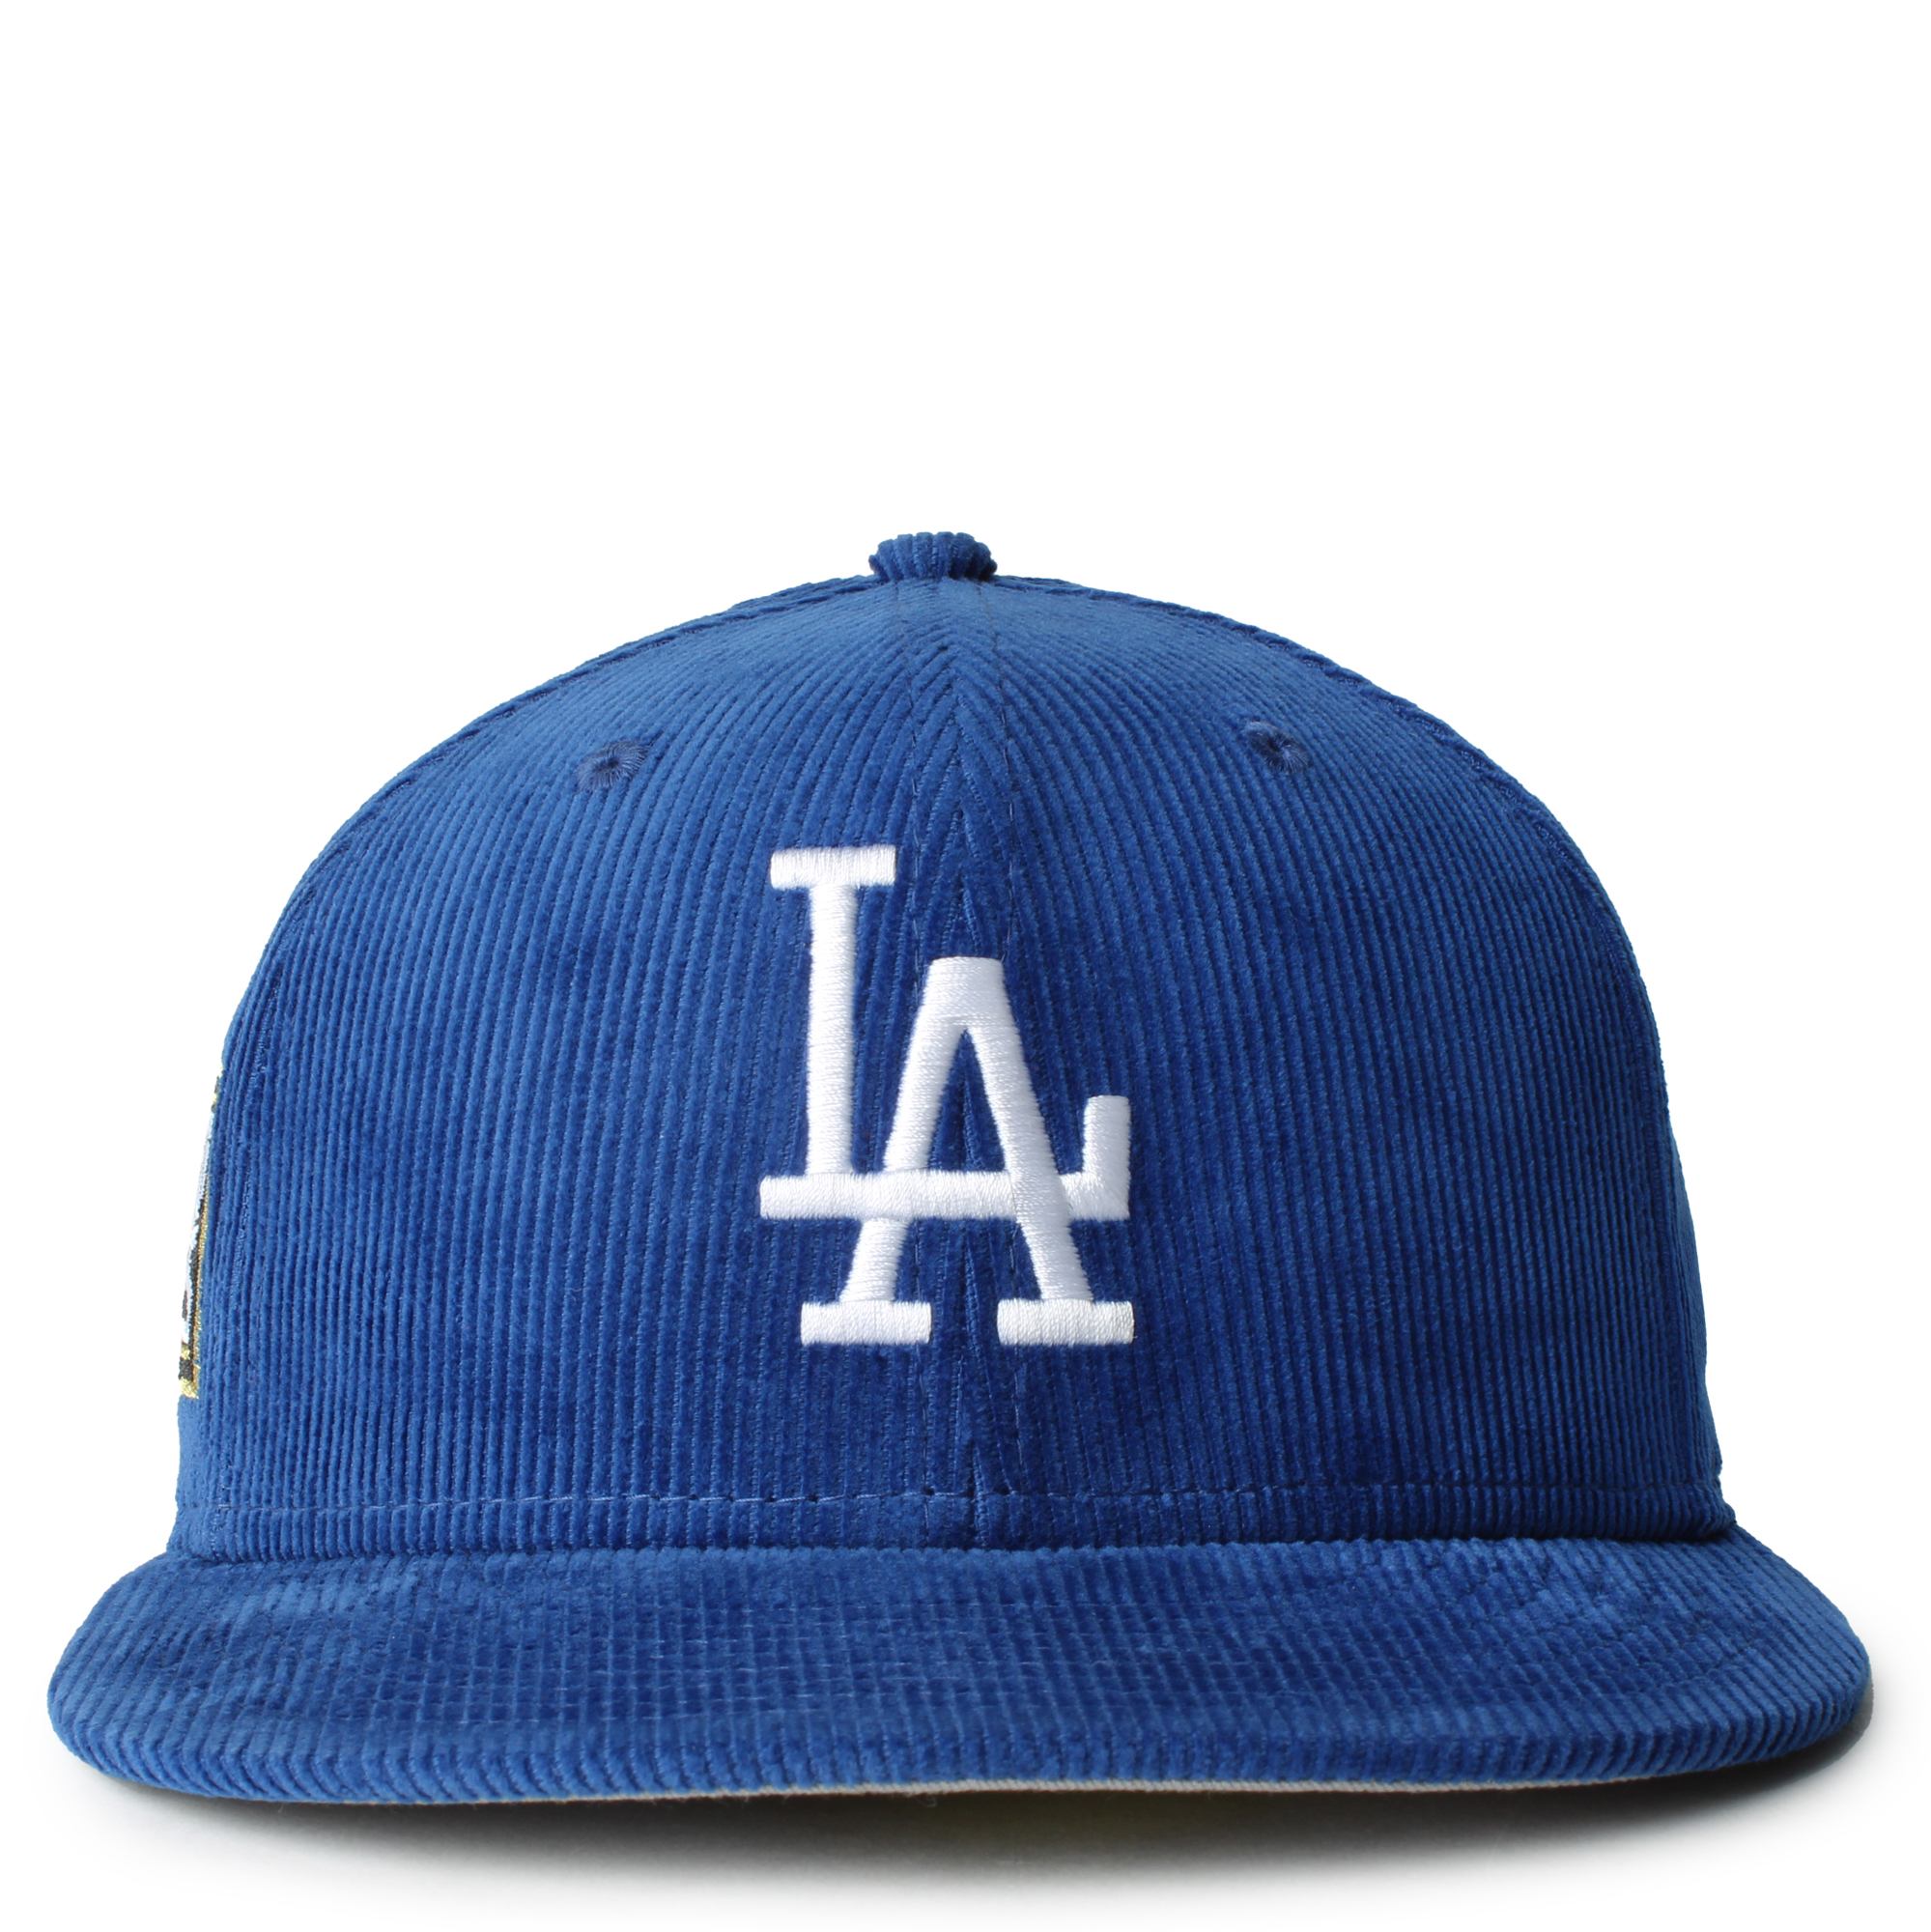 New Era Throwback Collection Dodgers T-Shirt